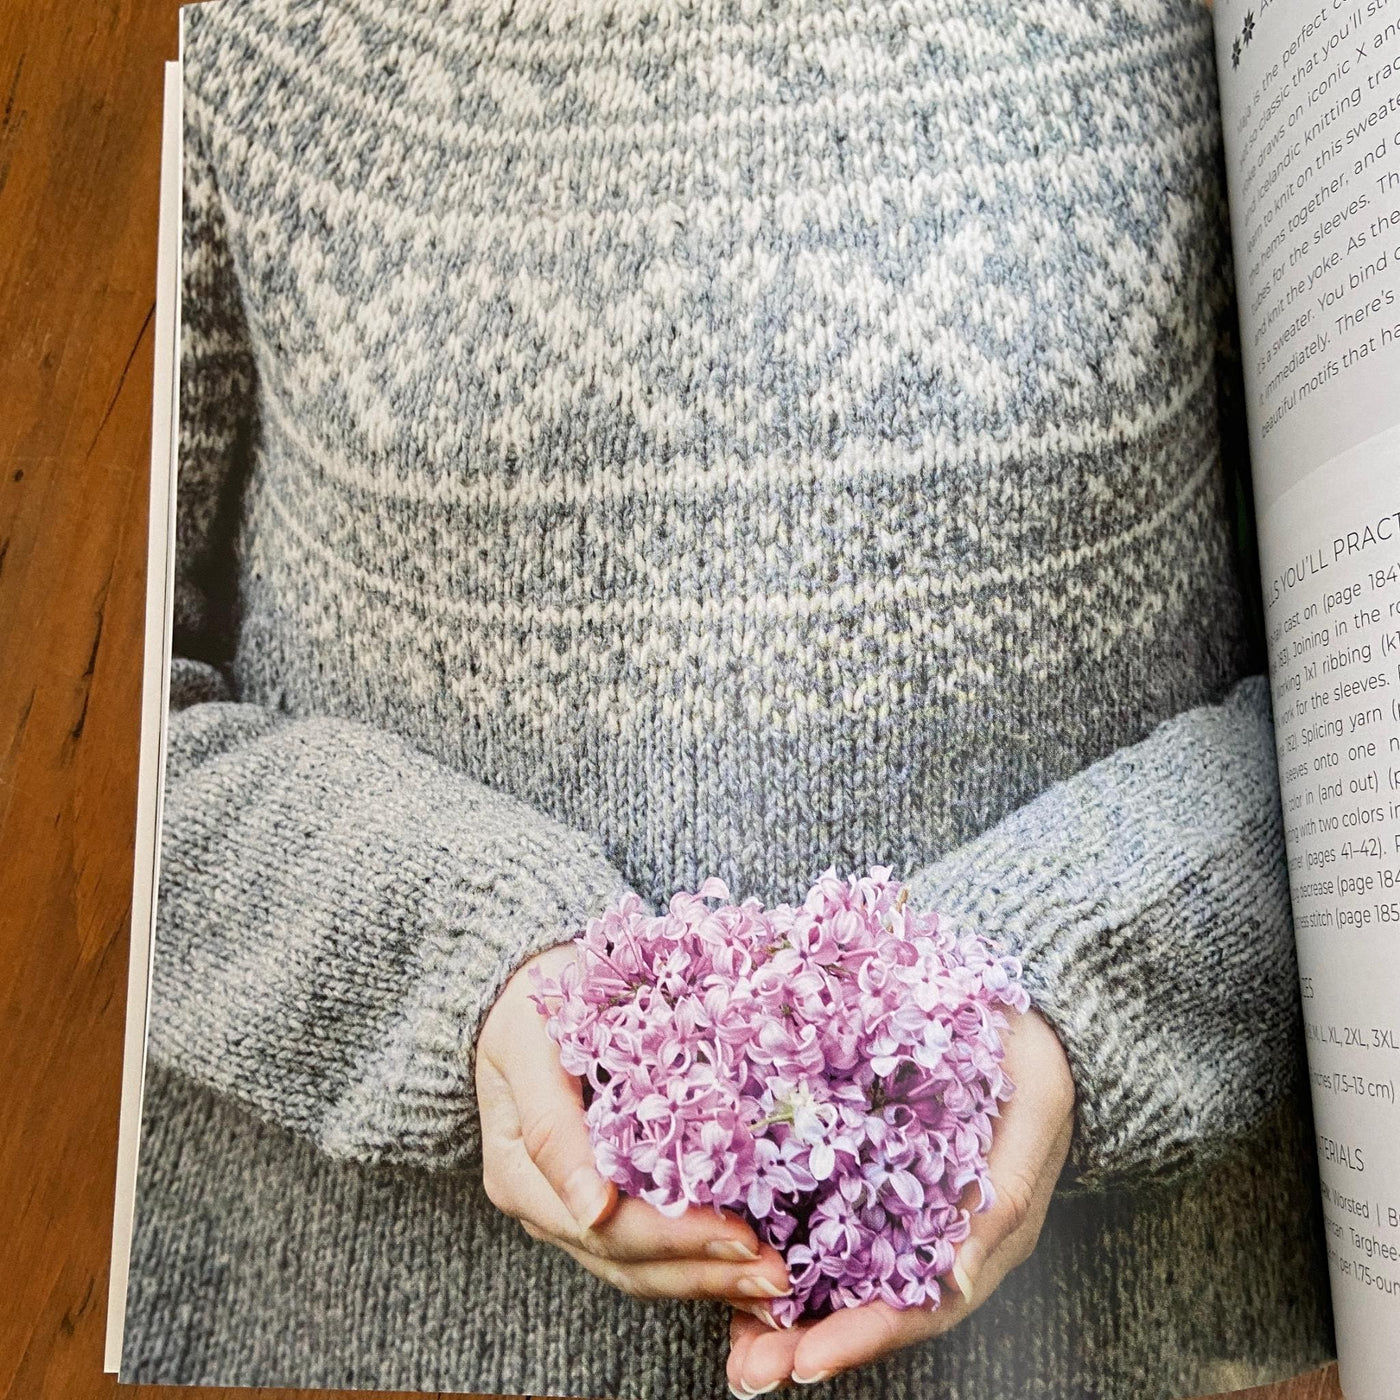 Page of Nordic Knitting Primer book with grey and cream colorwork sweater and hands holding purple flowers.